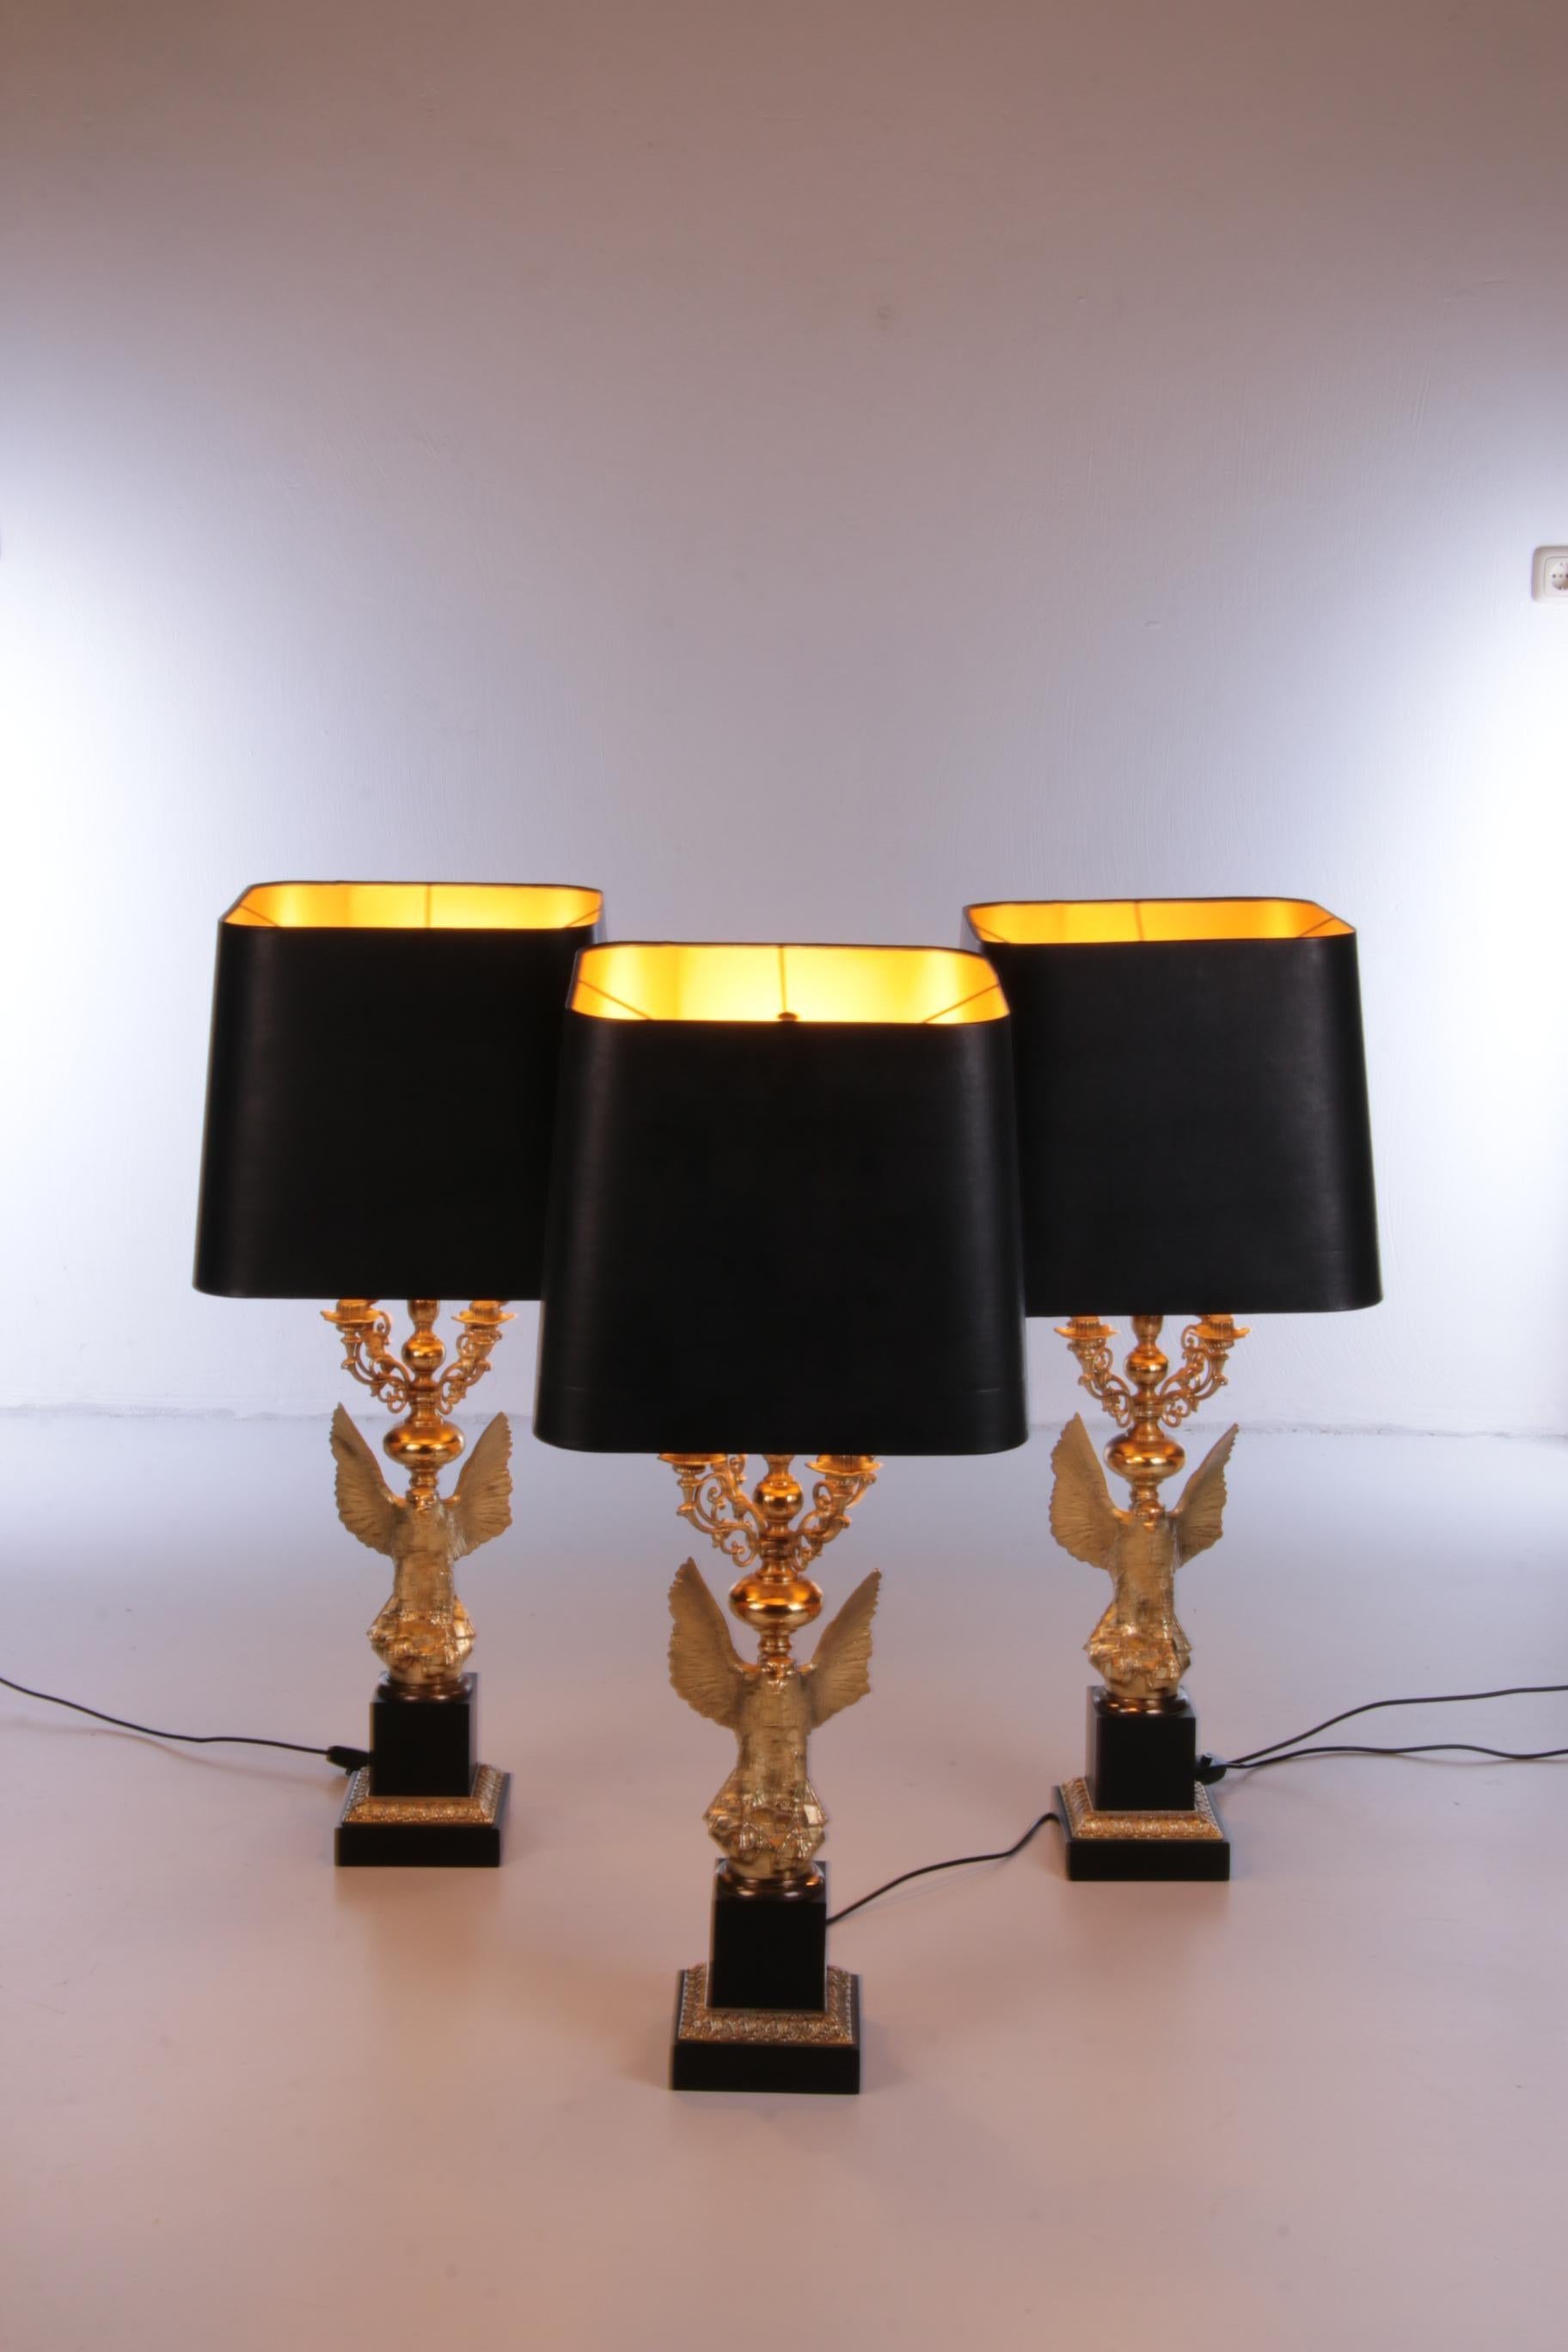 Jacques Charles for Maison Charles - Eagle Guilded table lamp by Maison Charles

Beautiful Eagle Guilded table lamp by Maison Charles, designed by Jacques Charles.

This Classic 1960s/70s Hollywood Regency (France) piece is made of 24 carat gold